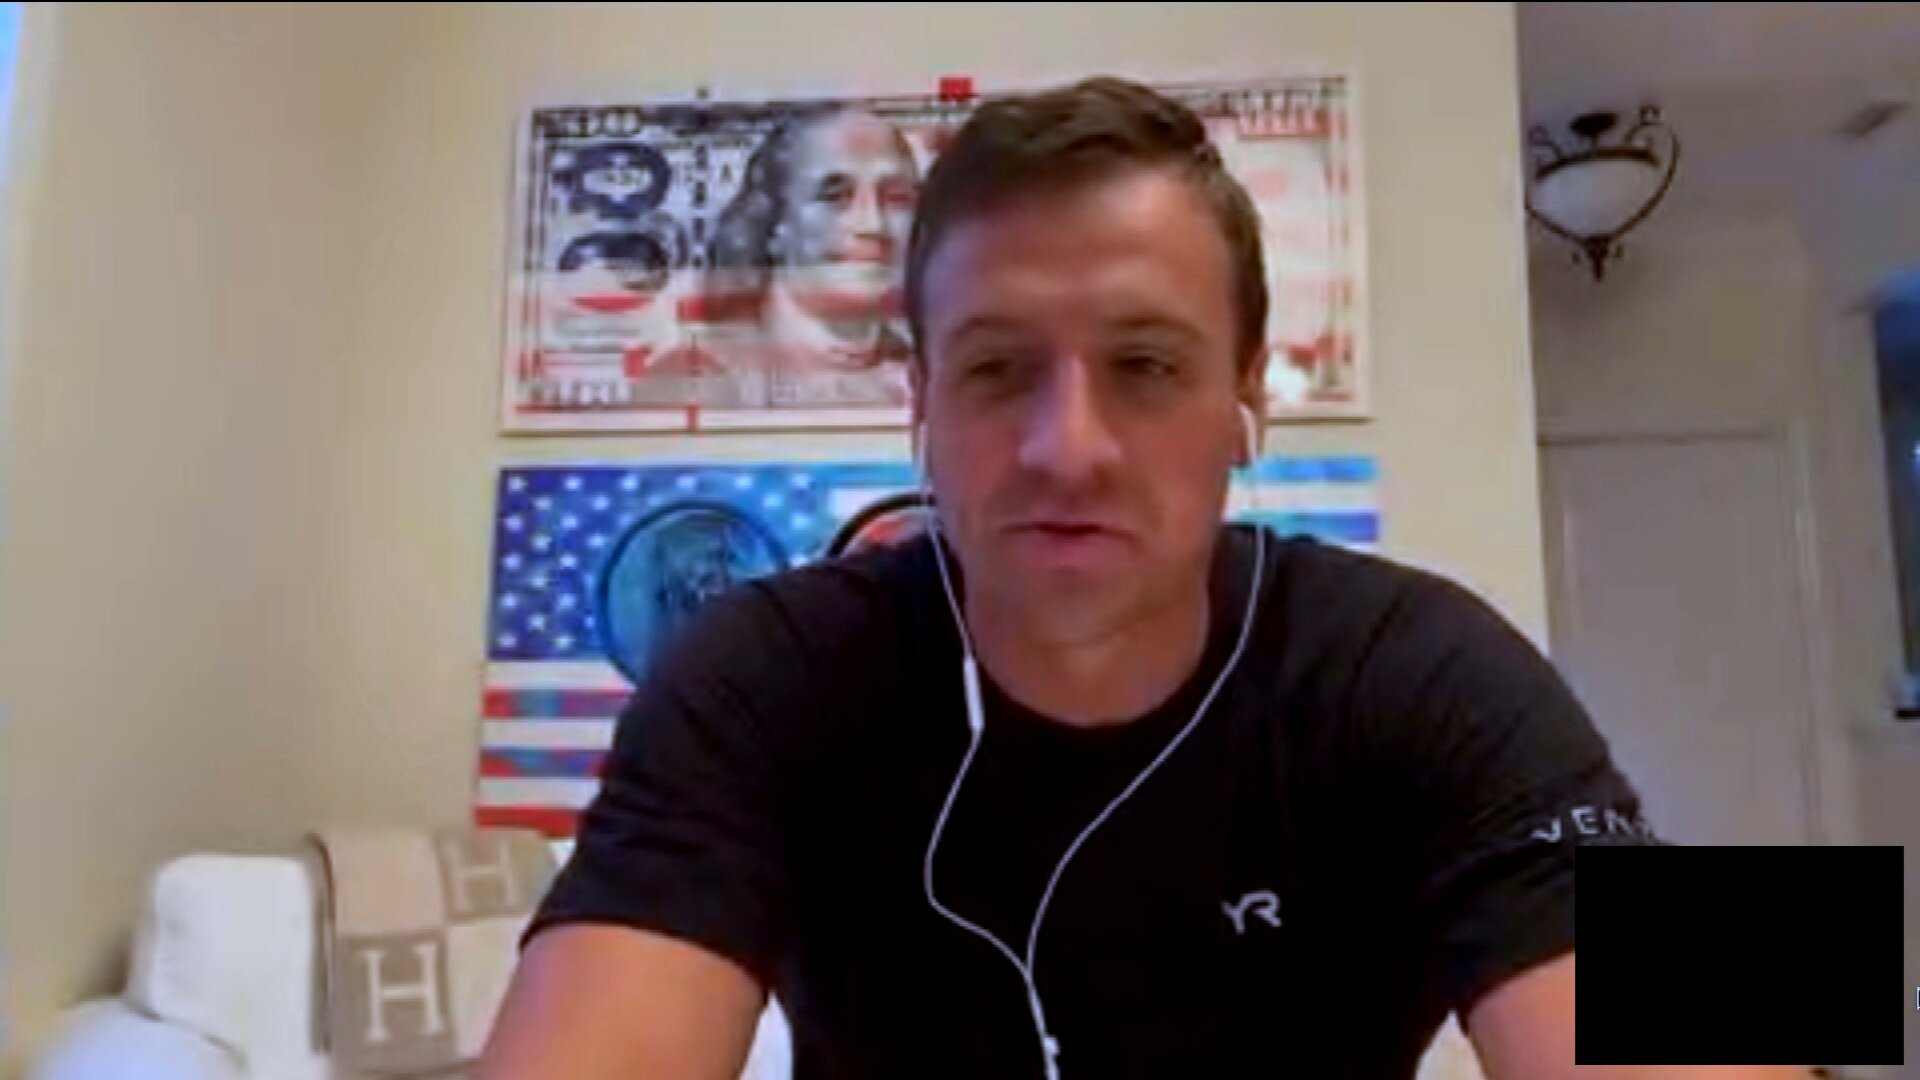 PHOTO: Ryan Lochte explains how he will adjust after the IOC announced the 2020 Tokyo games would be postponed.